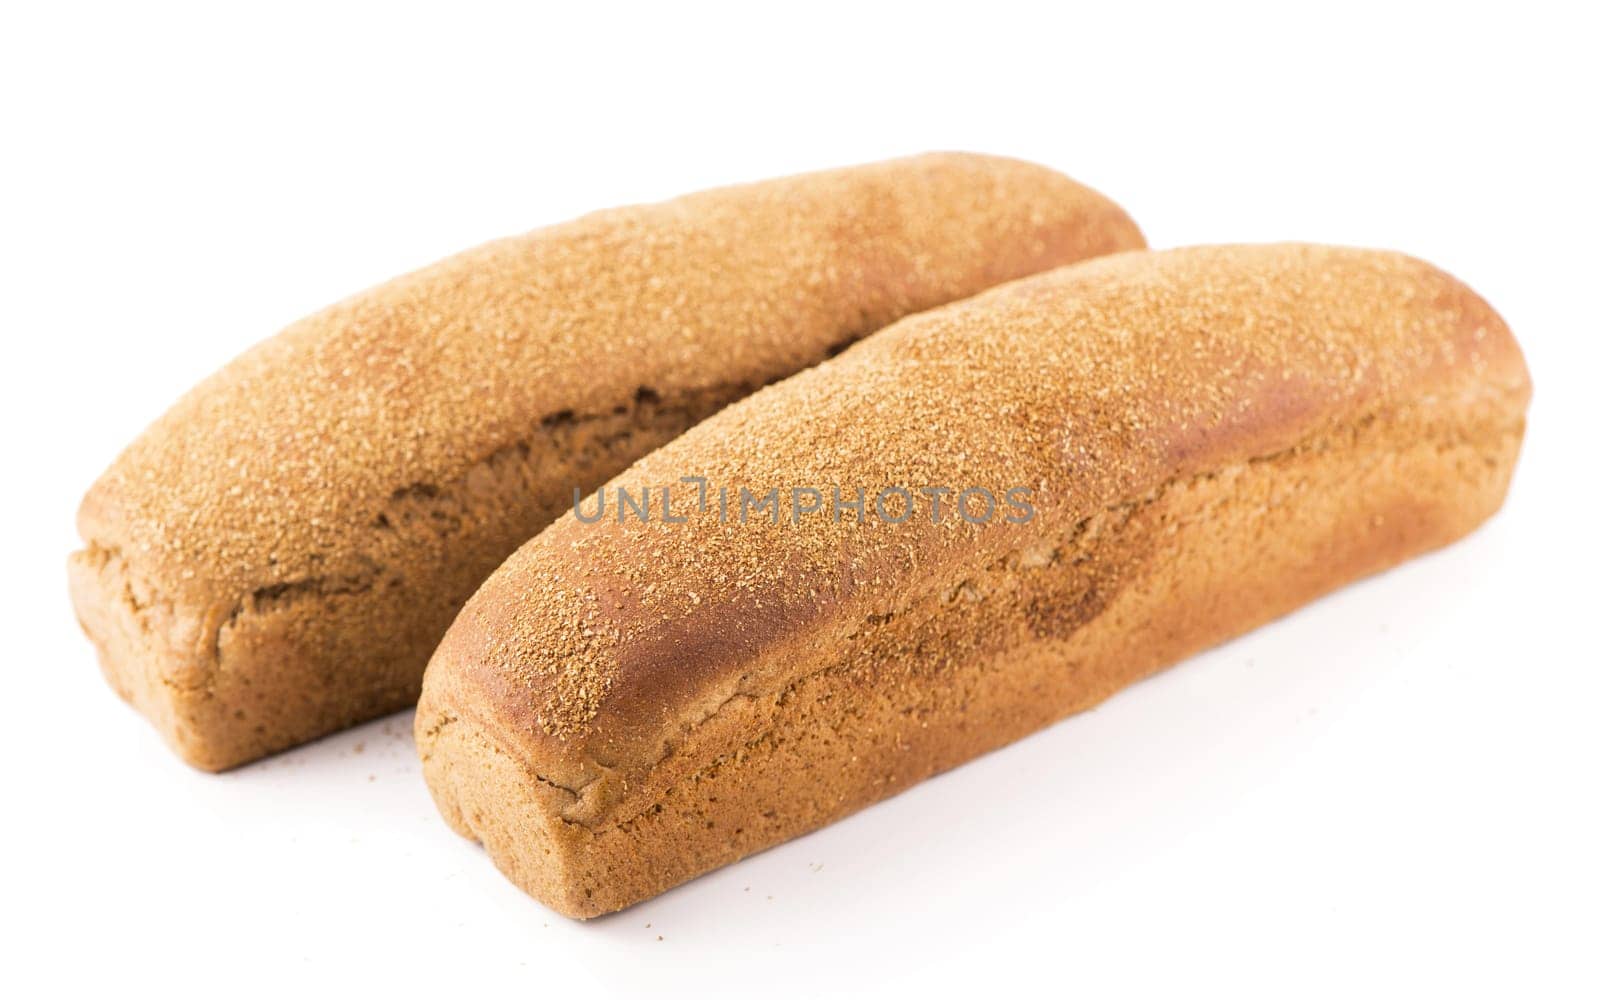 Petite sprinkling flour bread lies on a white background by aprilphoto